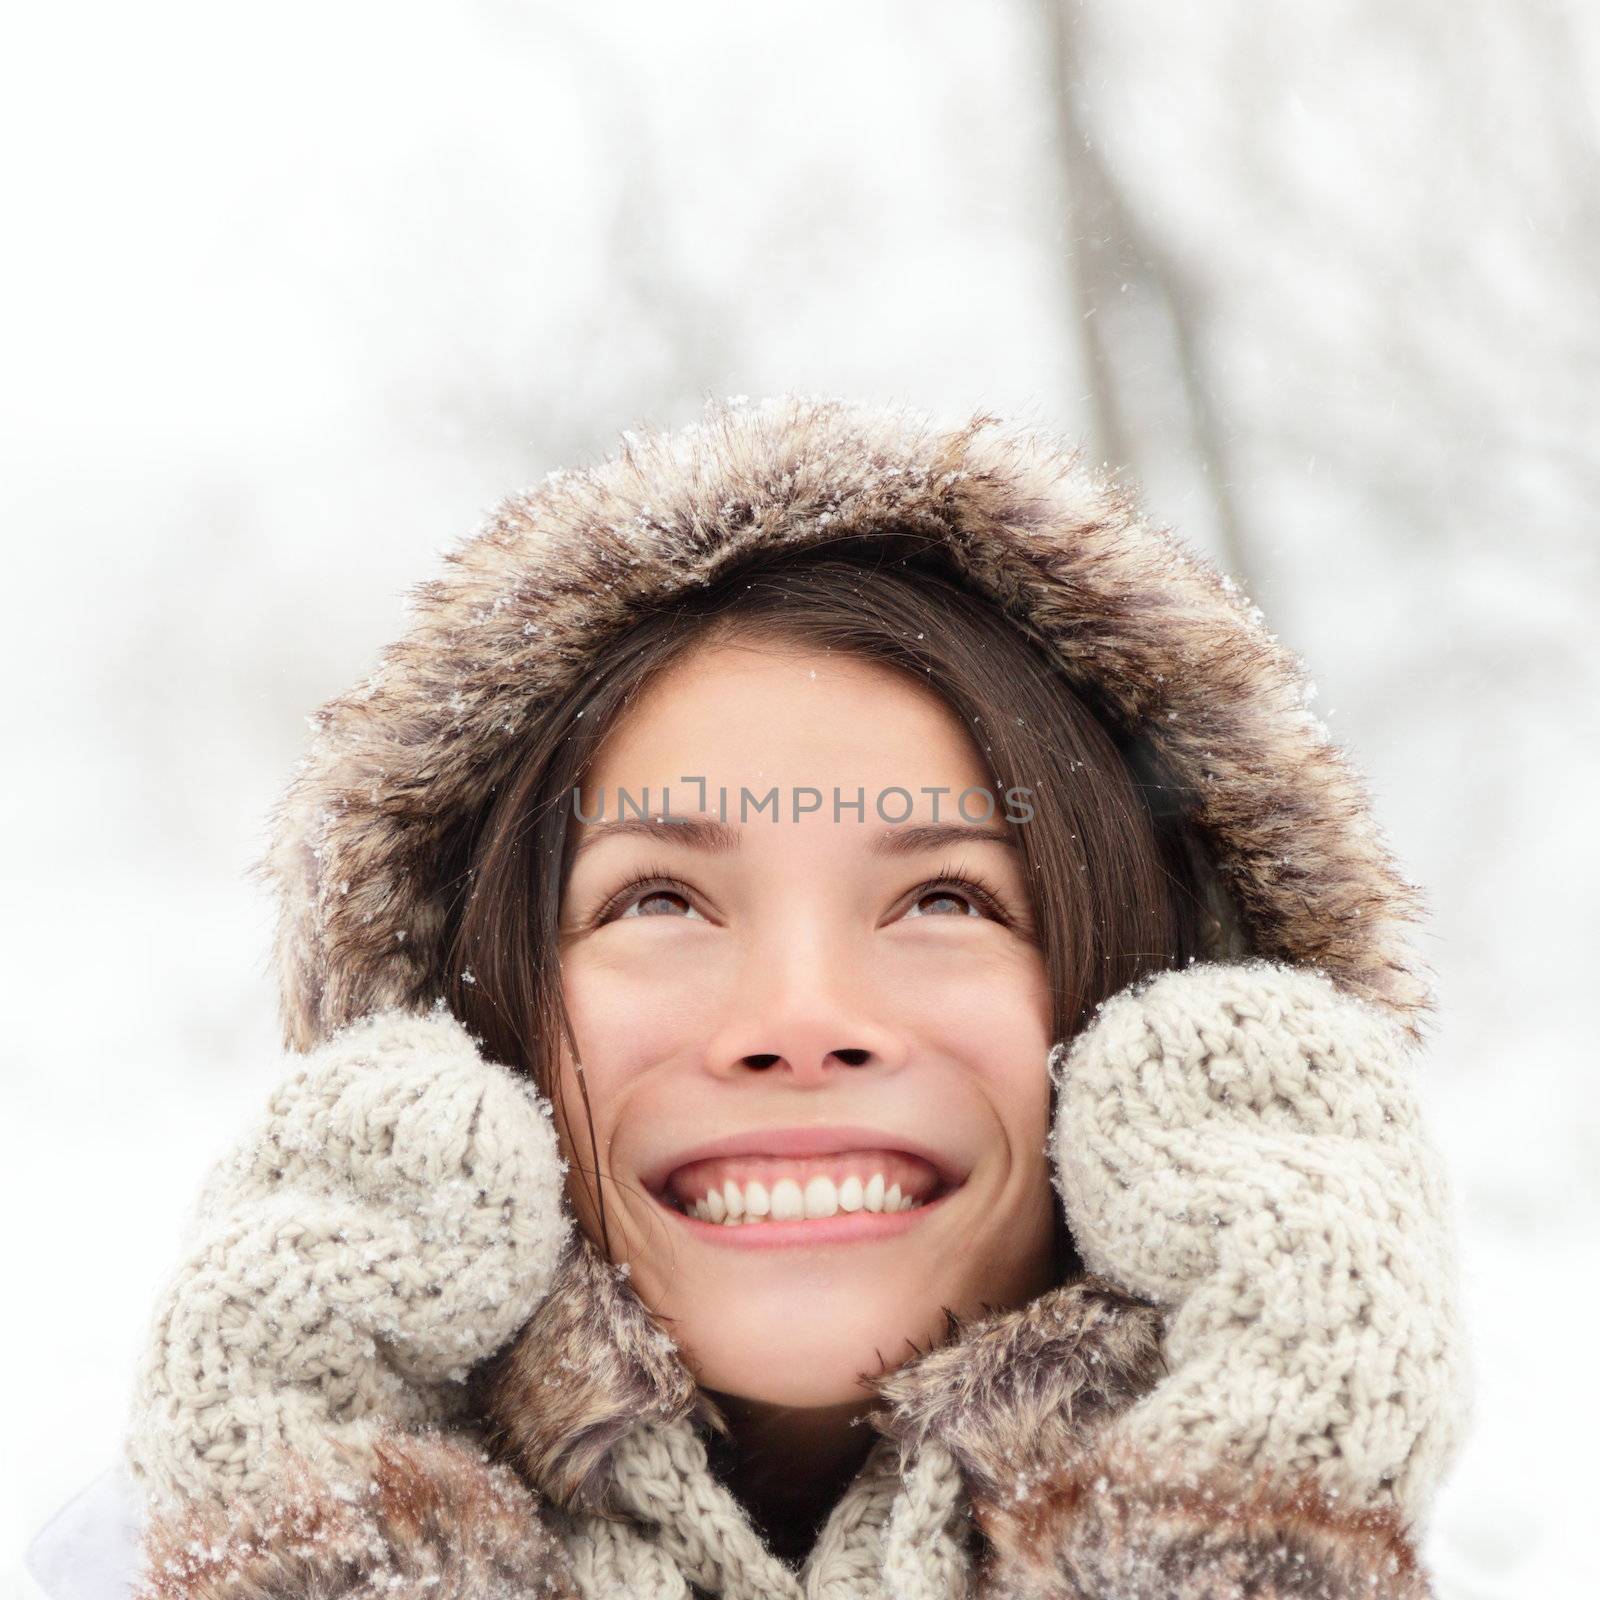 Winter woman looking up happy and smiling outdoors in snow on cold winter day. Asian girl model in her twenties.